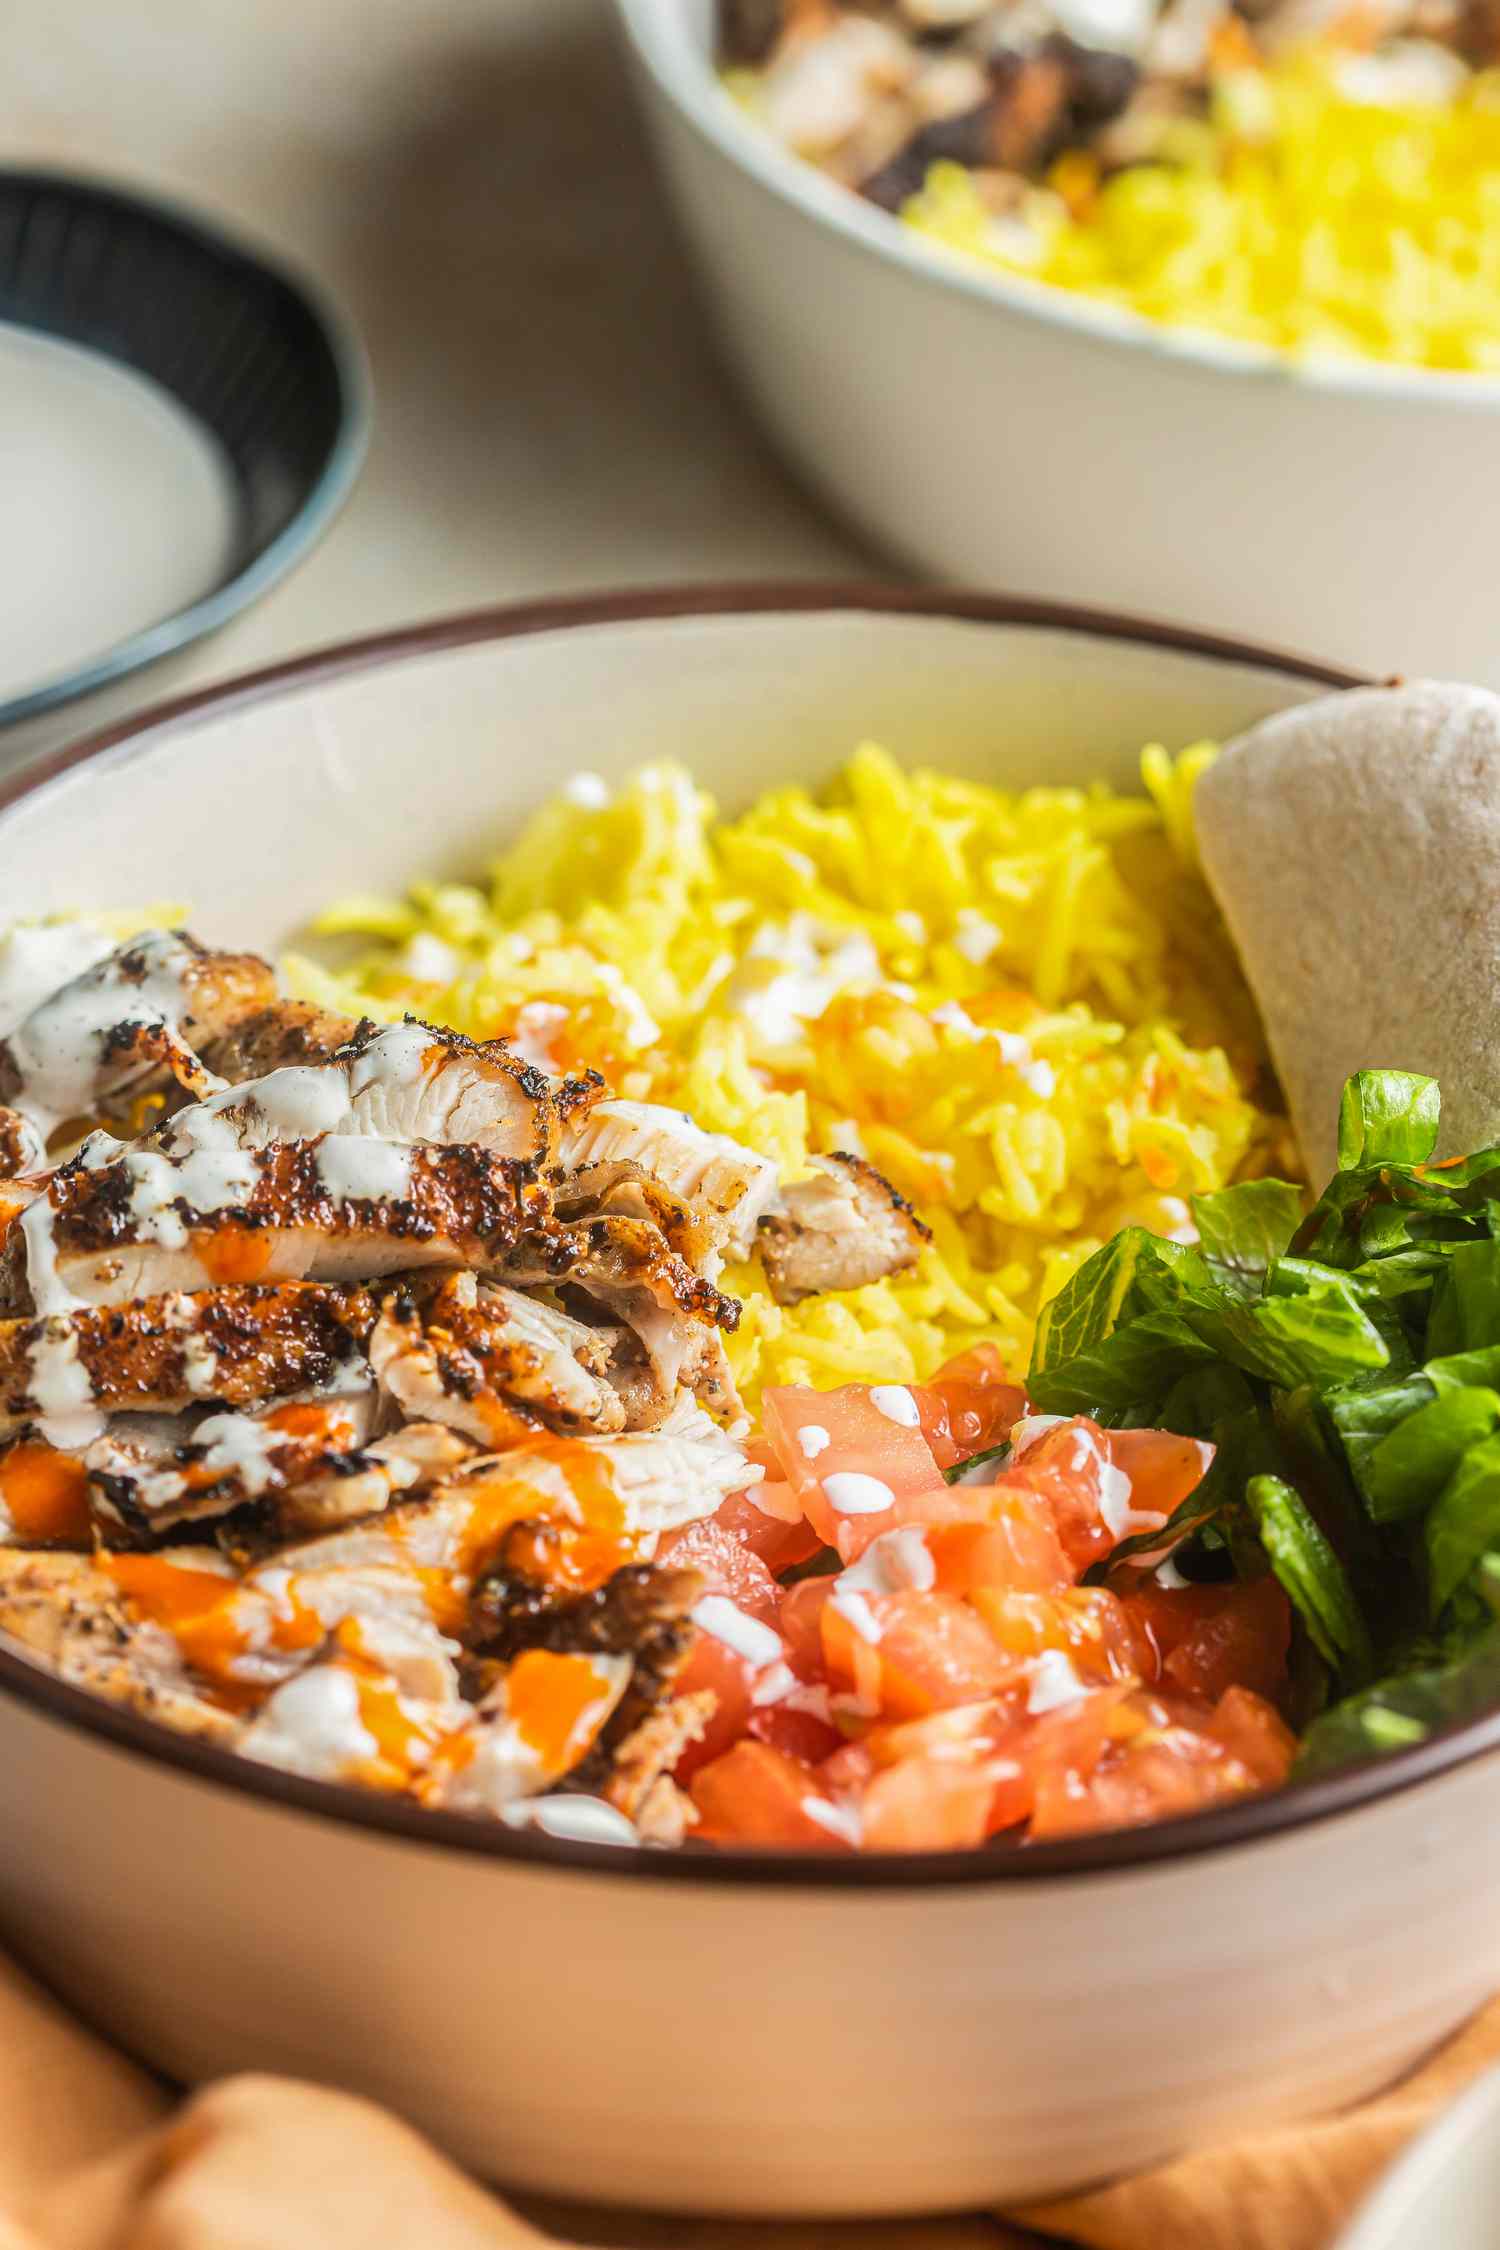 Bowl of Halal Cart-Style Chicken Over Rice, and in the Background, Another Serving in a Bowl and a Bowl of Dressing